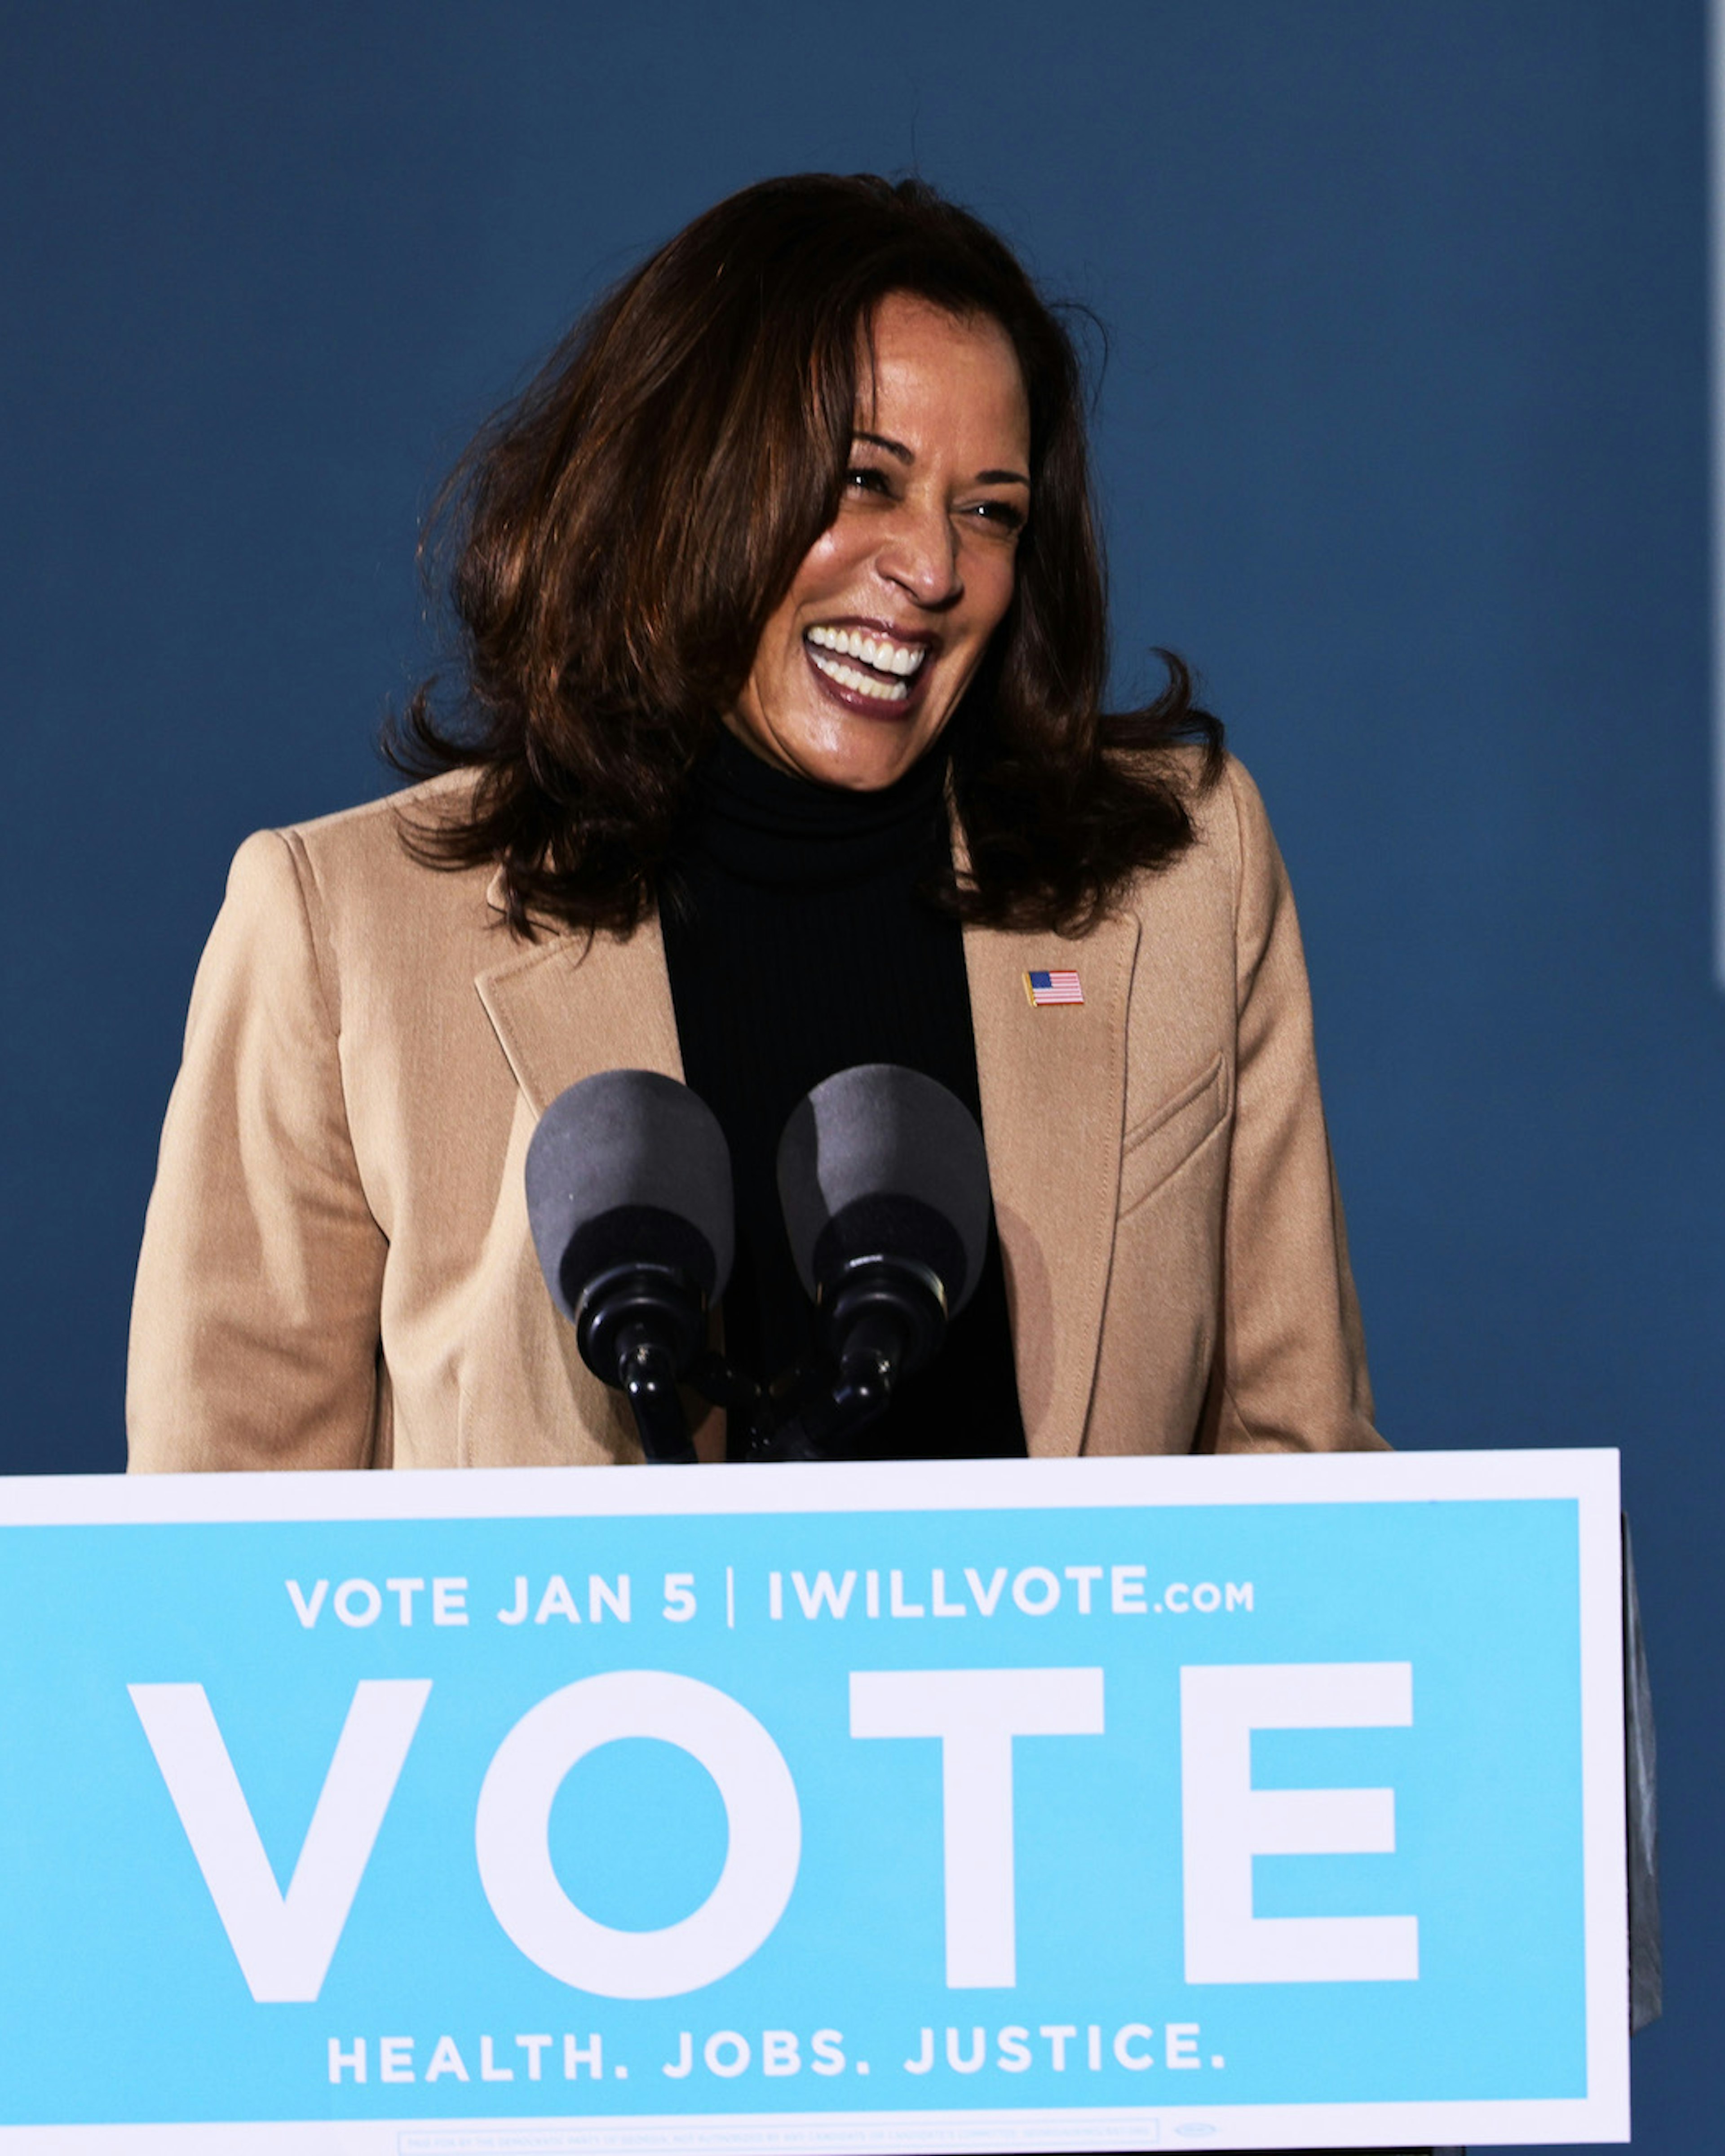 Vice President-elect Kamala Harris speaks during a drive-in rally at Garden City Stadium on January 03, 2021 in Savannah, Georgia. Vice President-elect Kamala Harris joined Georgia Democratic Senate candidates Rev. Raphael Warnock and Jon Ossoff for a campaign event two days before the January 5th runoff election that has implications into which party controls the U.S. Senate. According to AJC, 3 million people have already casted their votes ahead of Tuesday's election. (Photo by Michael M. Santiago/Getty Images)